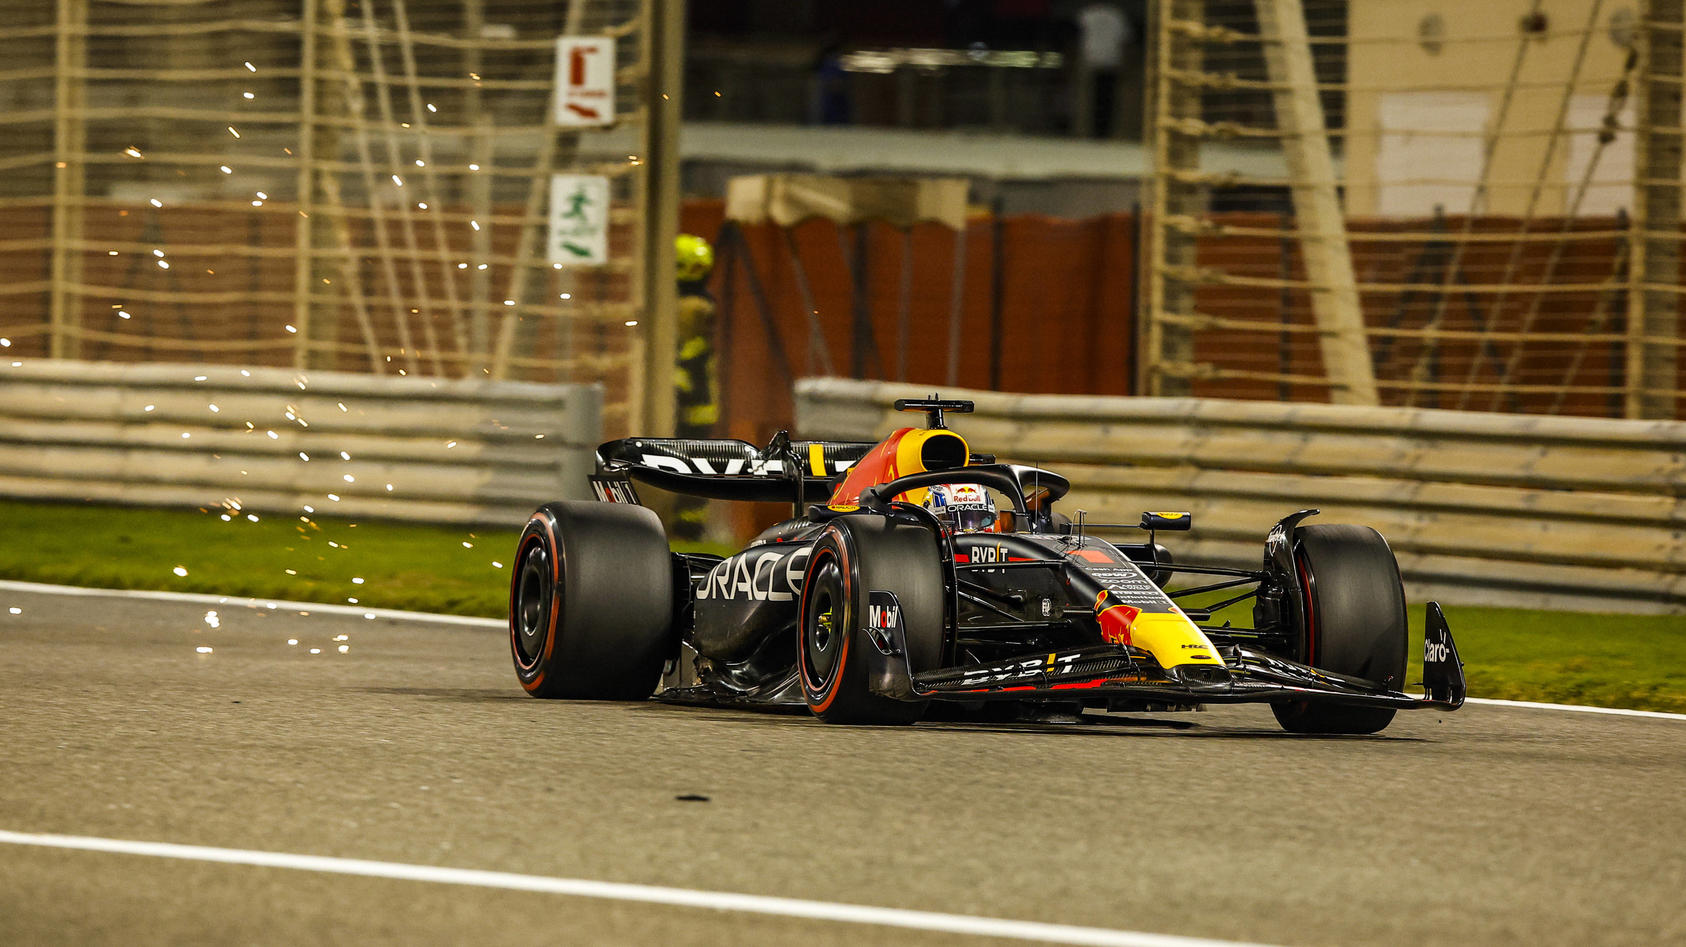 1 Max Verstappen NLD, Oracle Red Bull Racing, F1 Grand Prix of Bahrain at Bahrain International Circuit on March 5, 2023 in Sakhir, Bahrain. Photo by HOCH ZWEI Sakhir Bahrain *** 1 Max Verstappen NLD, Oracle Red Bull Racing , F1 Grand Prix of Bahrain